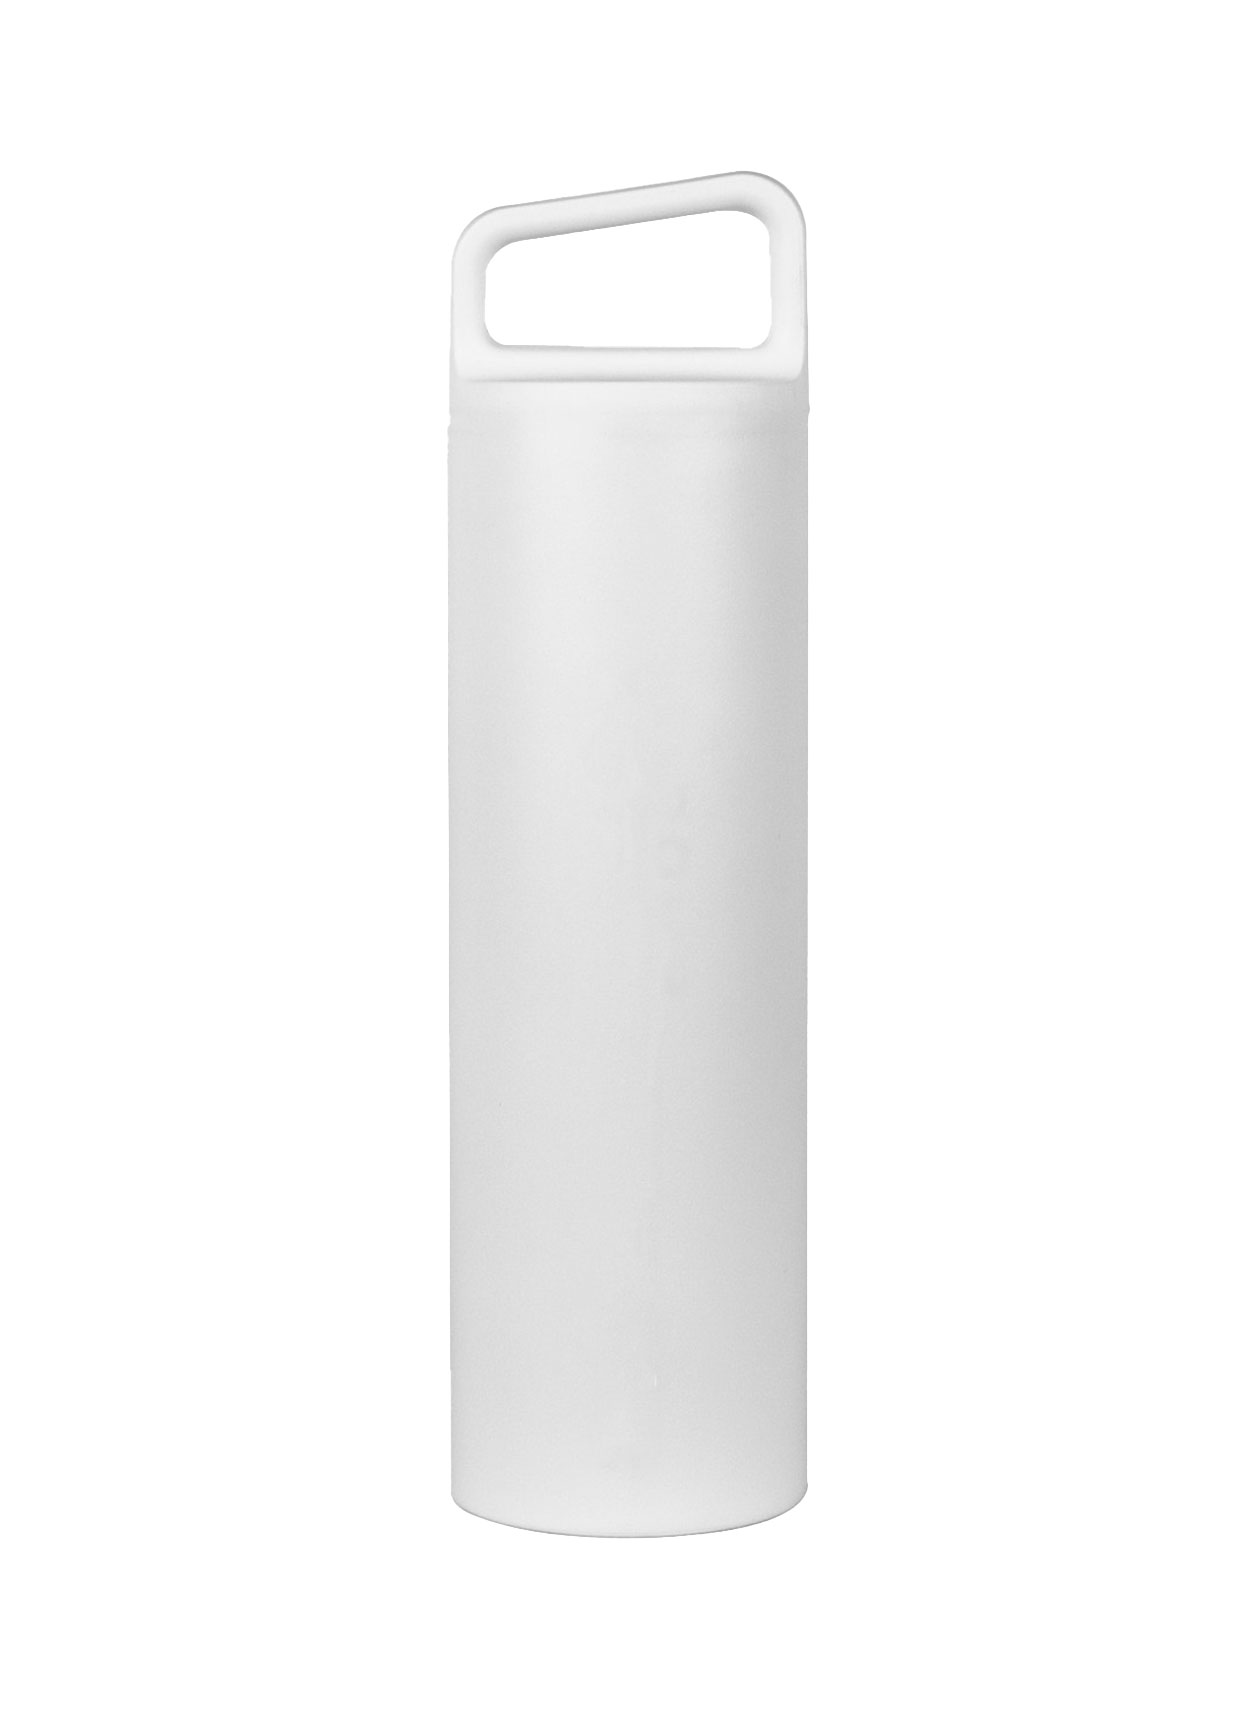 Miir White Powder Vacuum Insulated Wide Mouth Bottle - 20 oz